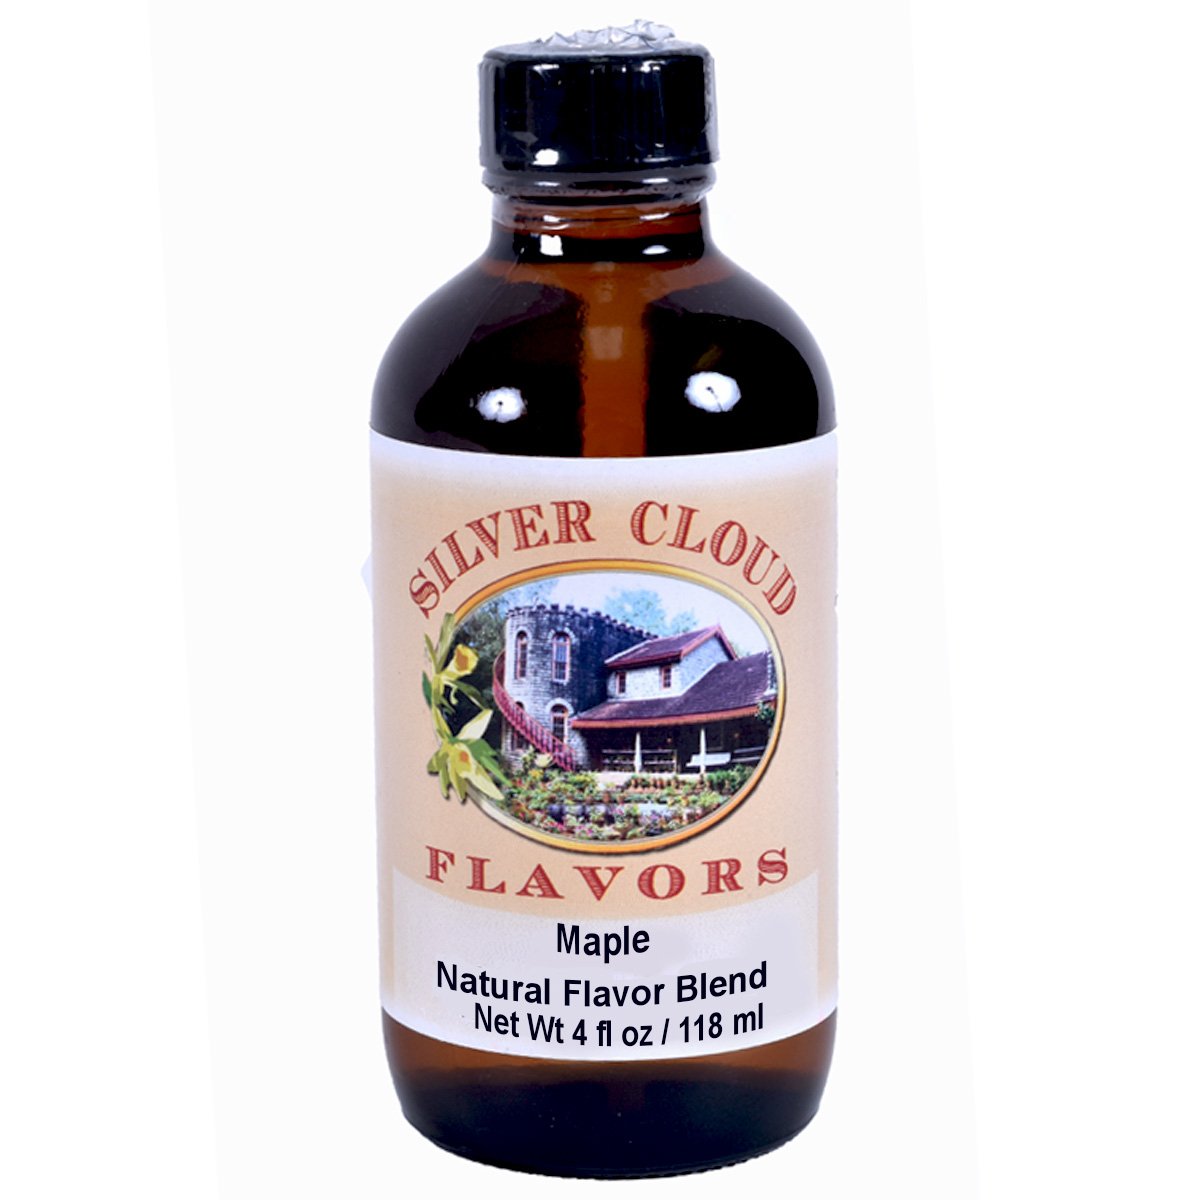 Maple, Natural Flavor Blend Silver Cloud Extract - Bake Supply Plus